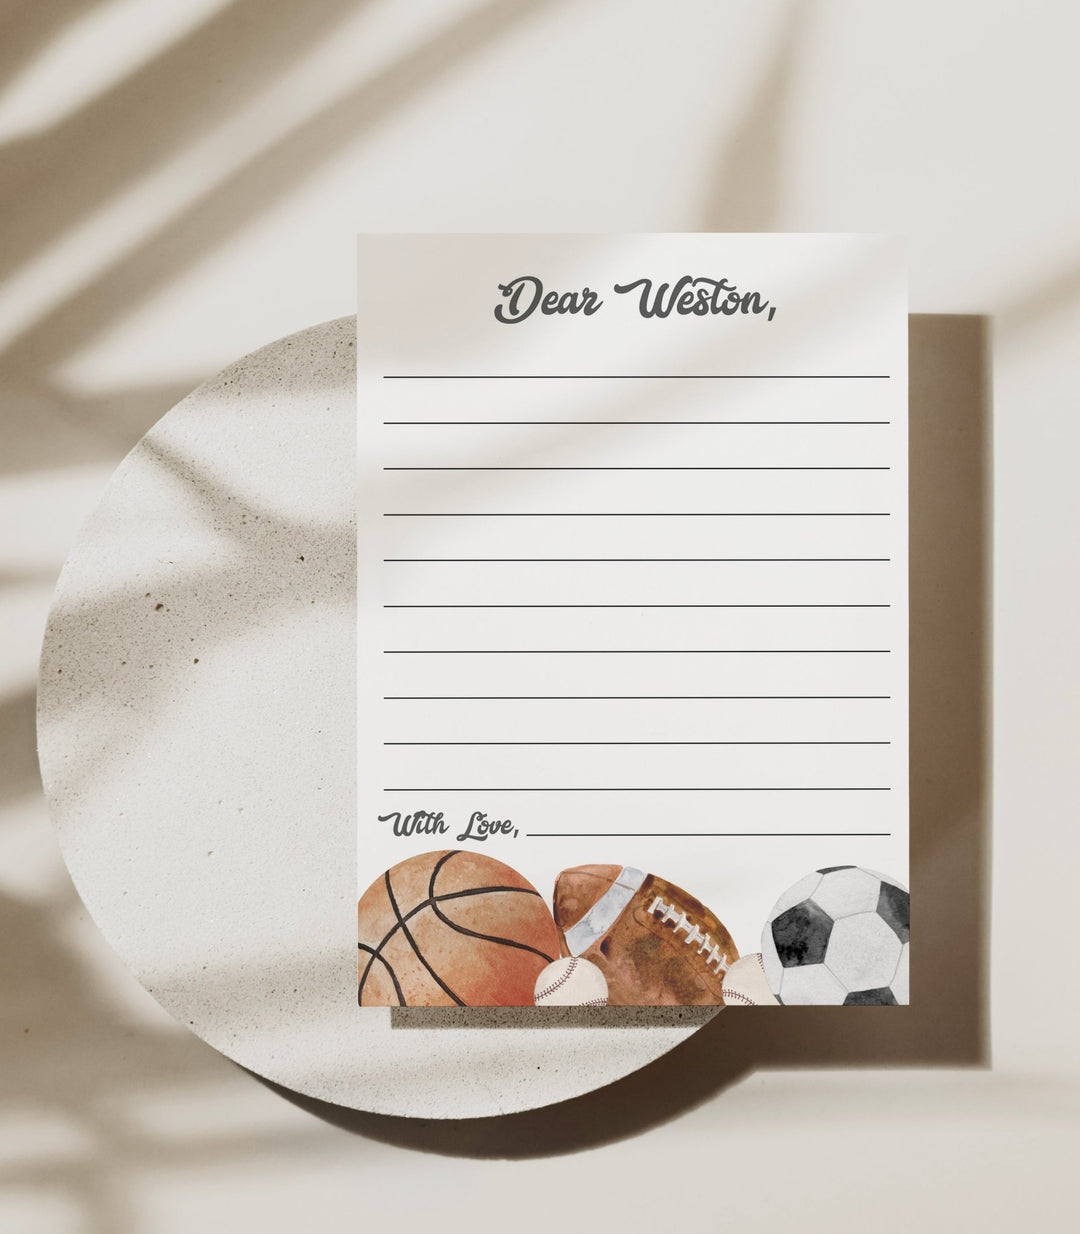 Sports Birthday Time Capsule Sign and Note Cards - High Peaks Studios